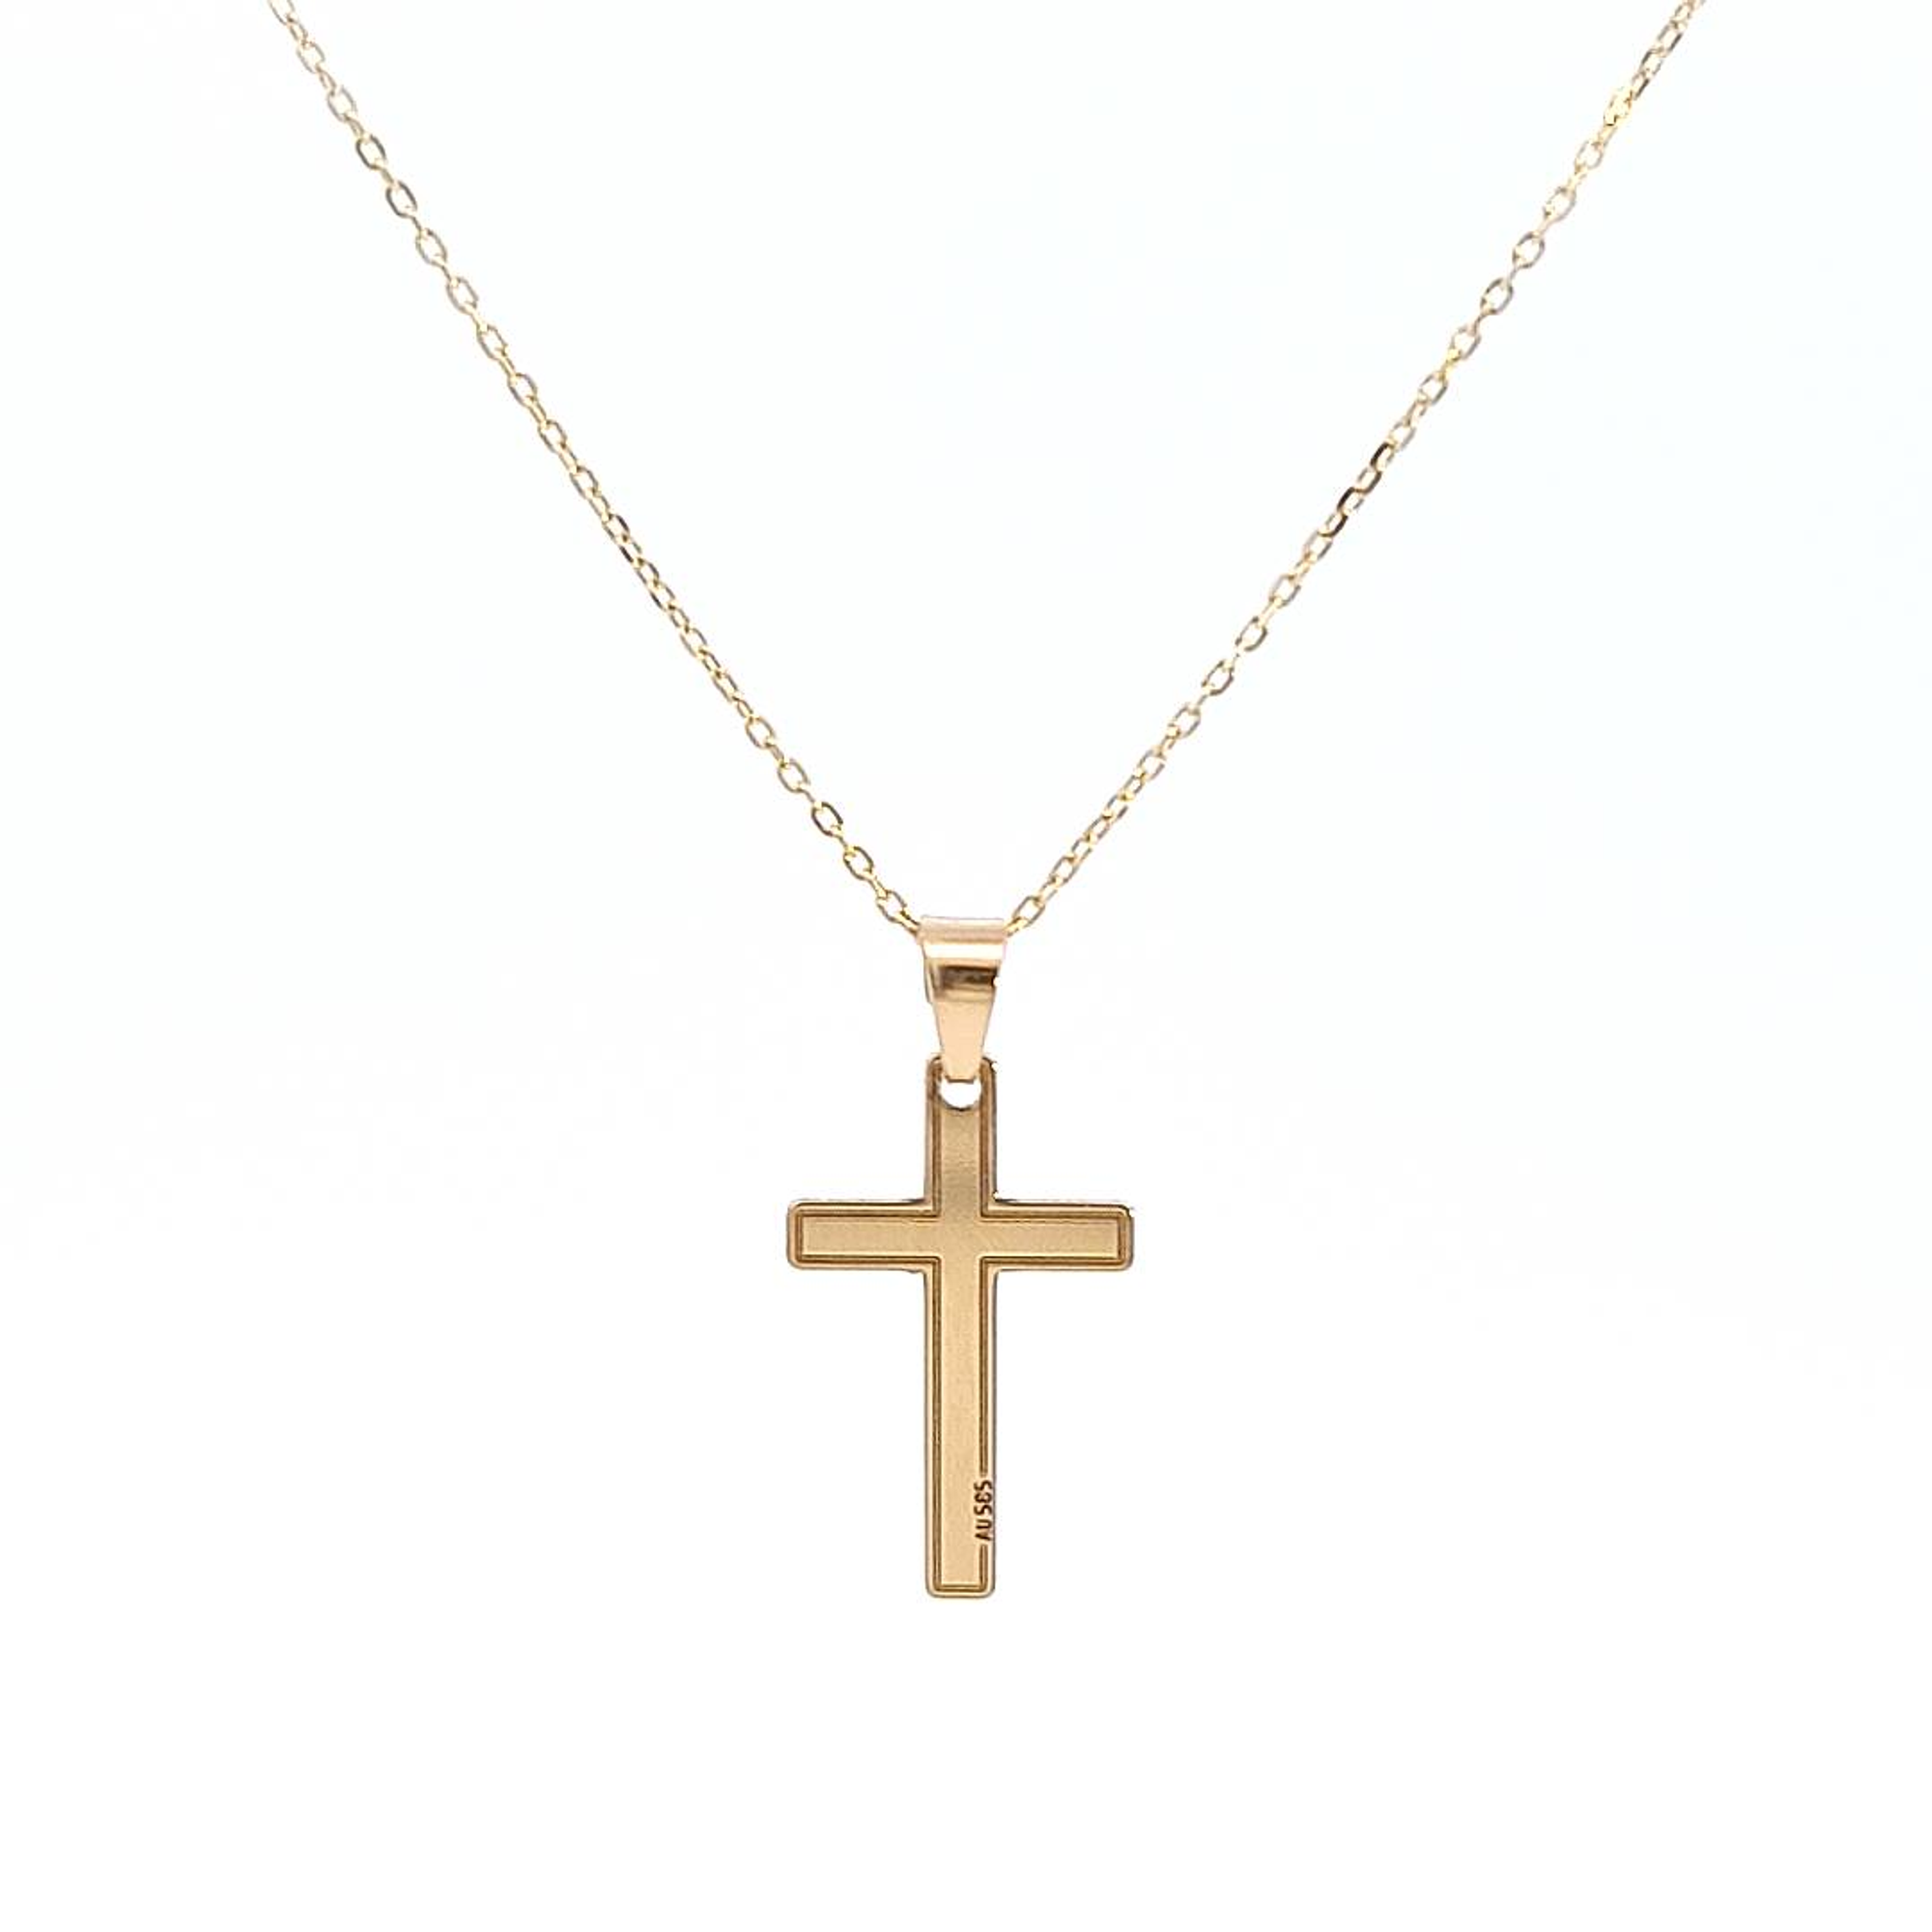 Faith's 14k Gold Cross Necklace - Front view showing the delicate 15mm height cross pendant in solid gold marked 585